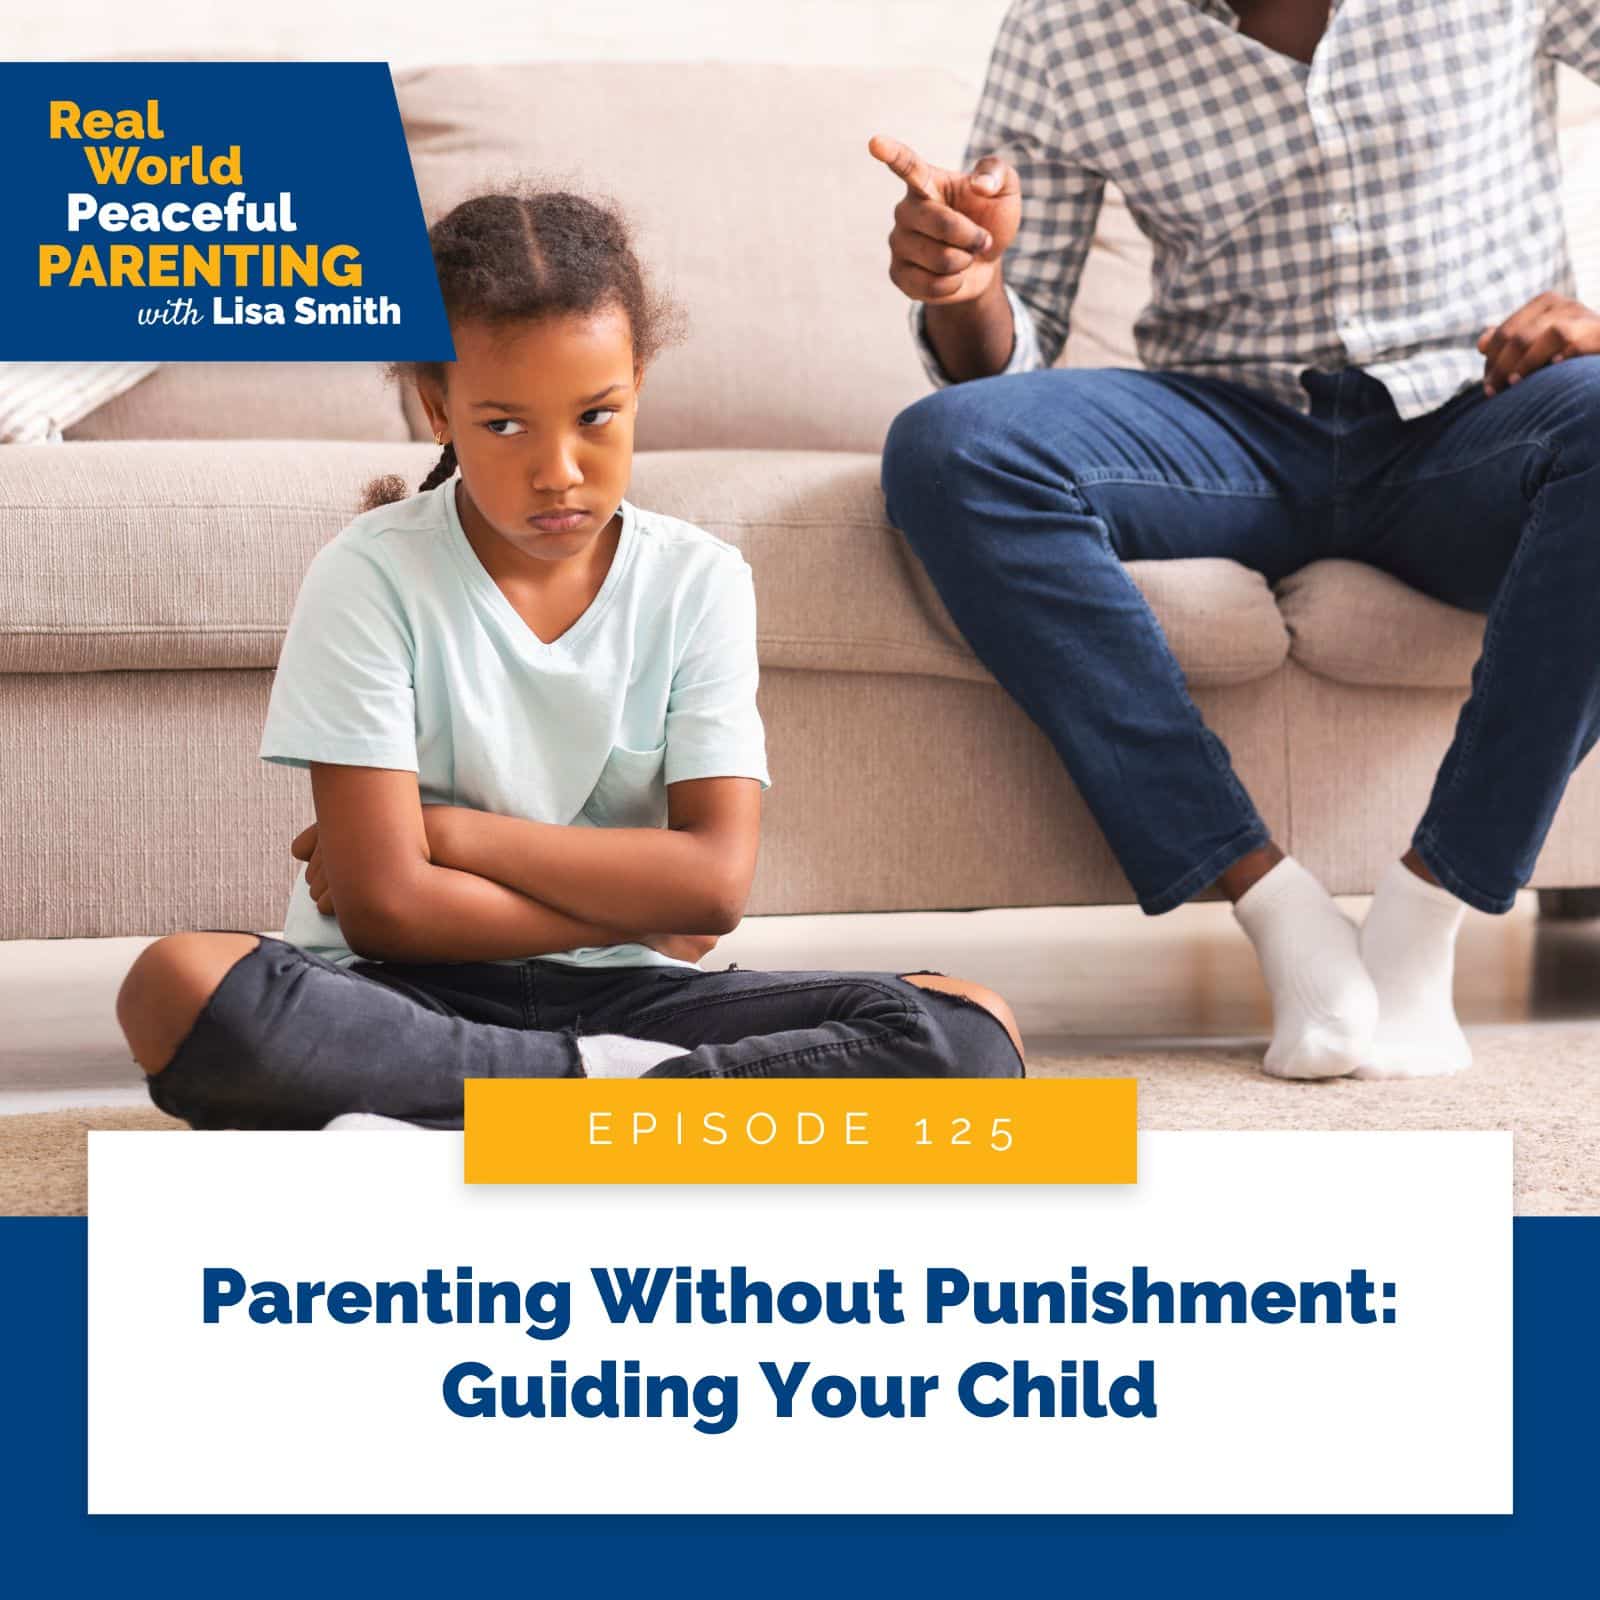 Real World Peaceful Parenting Lisa Smith | Parenting Without Punishment: Guiding Your Child